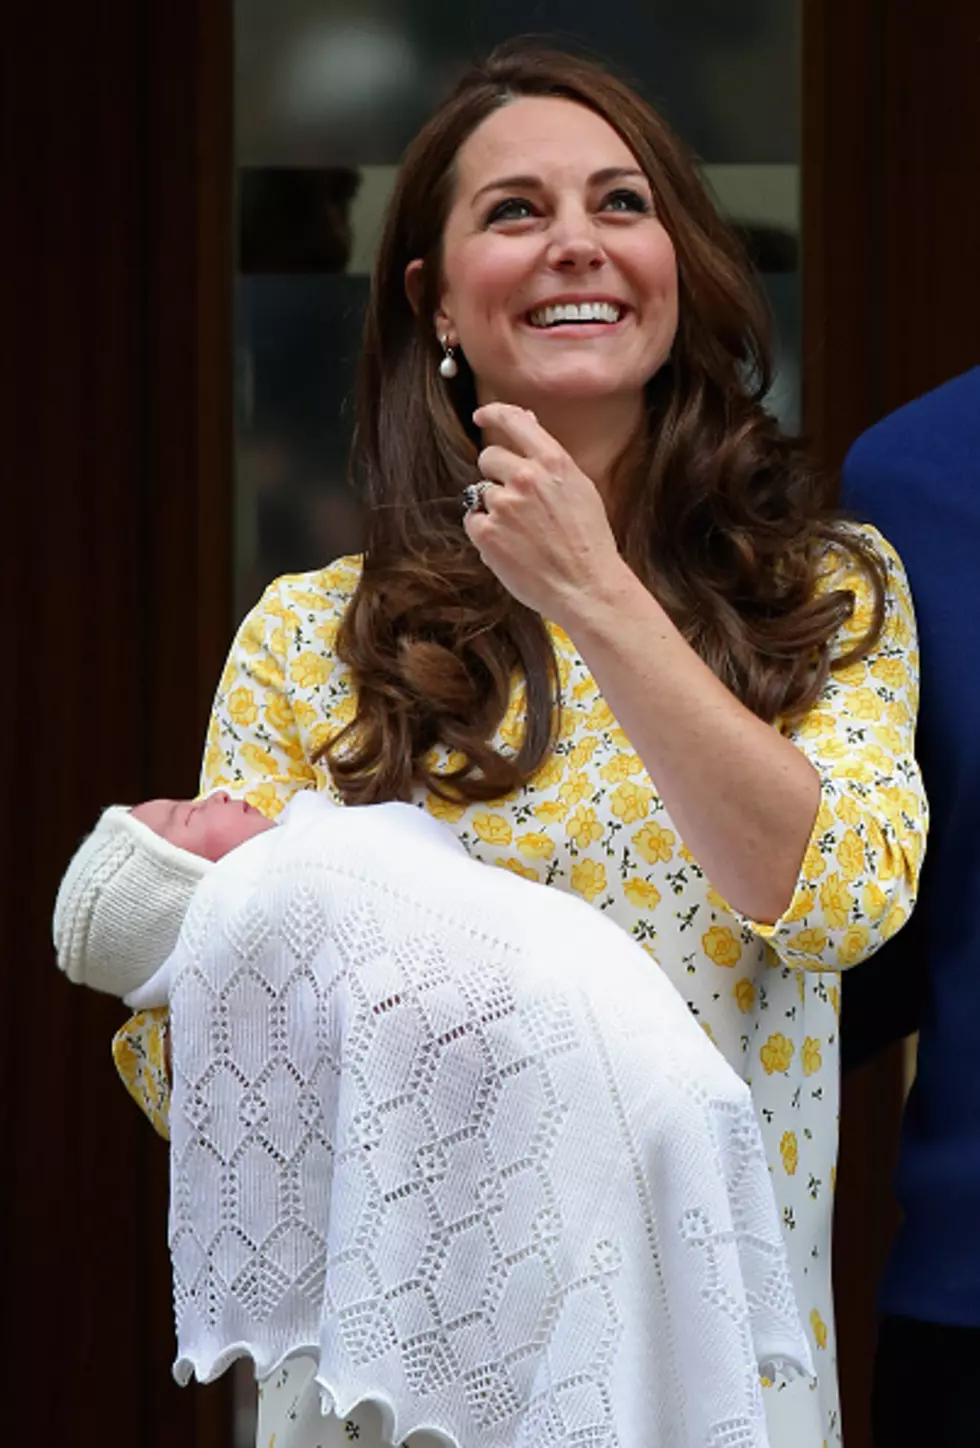 What Do You REALLY Think of the Royal Baby Name? [POLL]